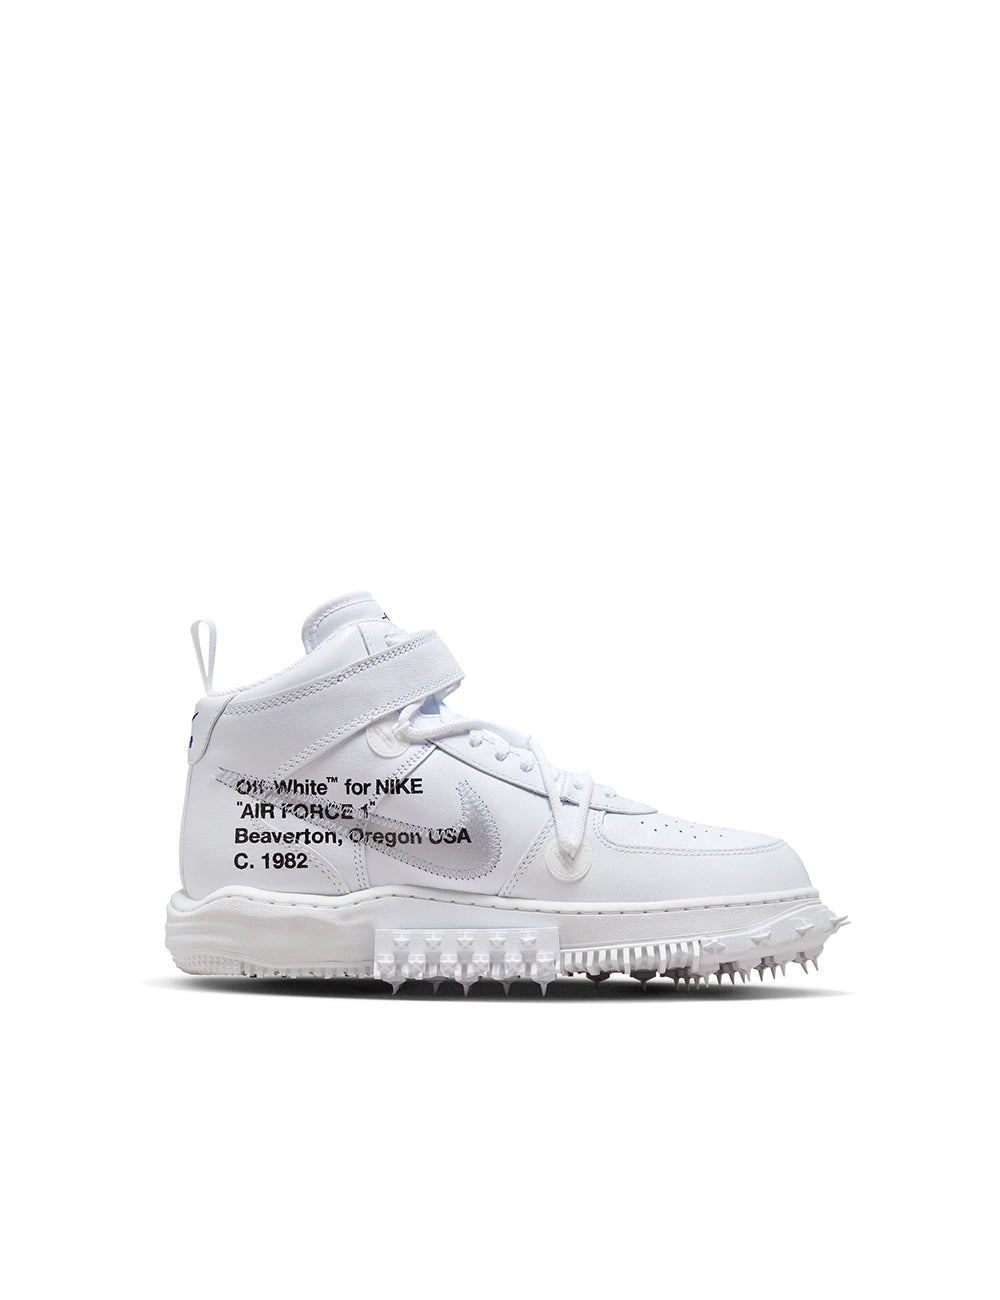 OFF WHITE NIKE_AIR FORCE 1 MID SP LTHR